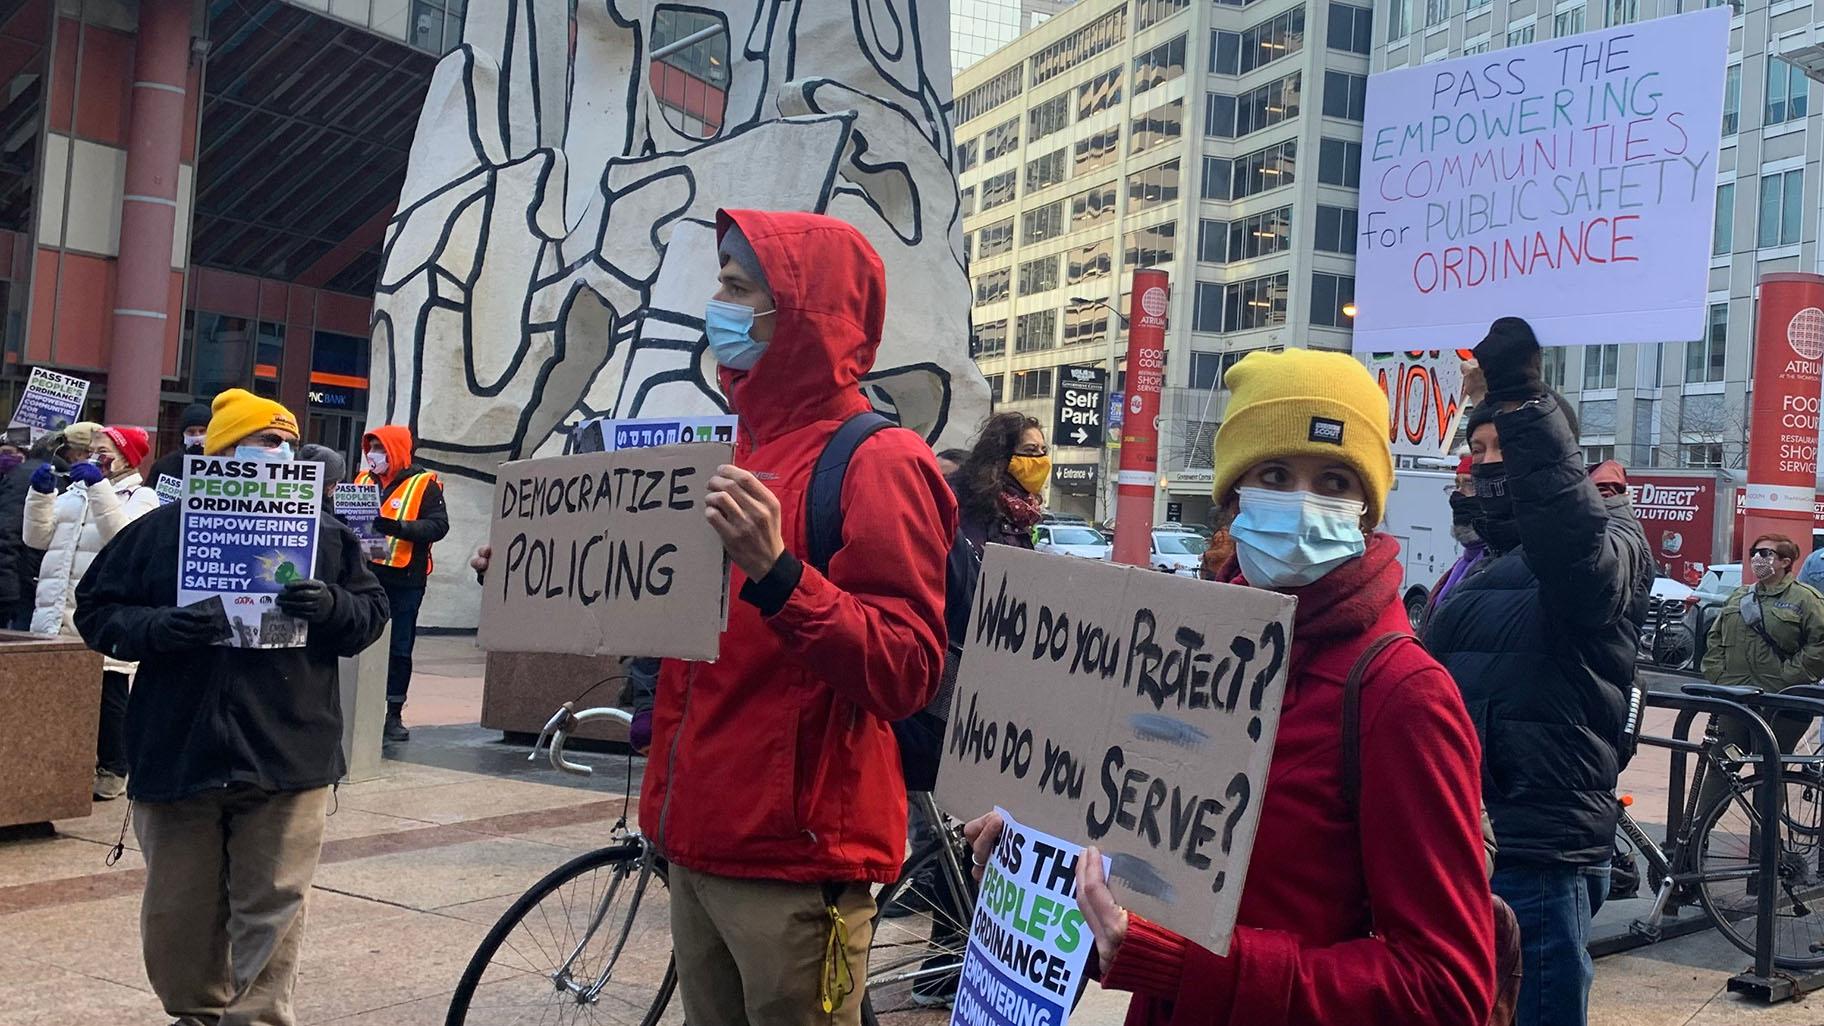 Supporters of the Empowering Communities for Public Safety plan call for more police accountability during a rally April 21, 2021. (Heather Cherone / WTTW News)